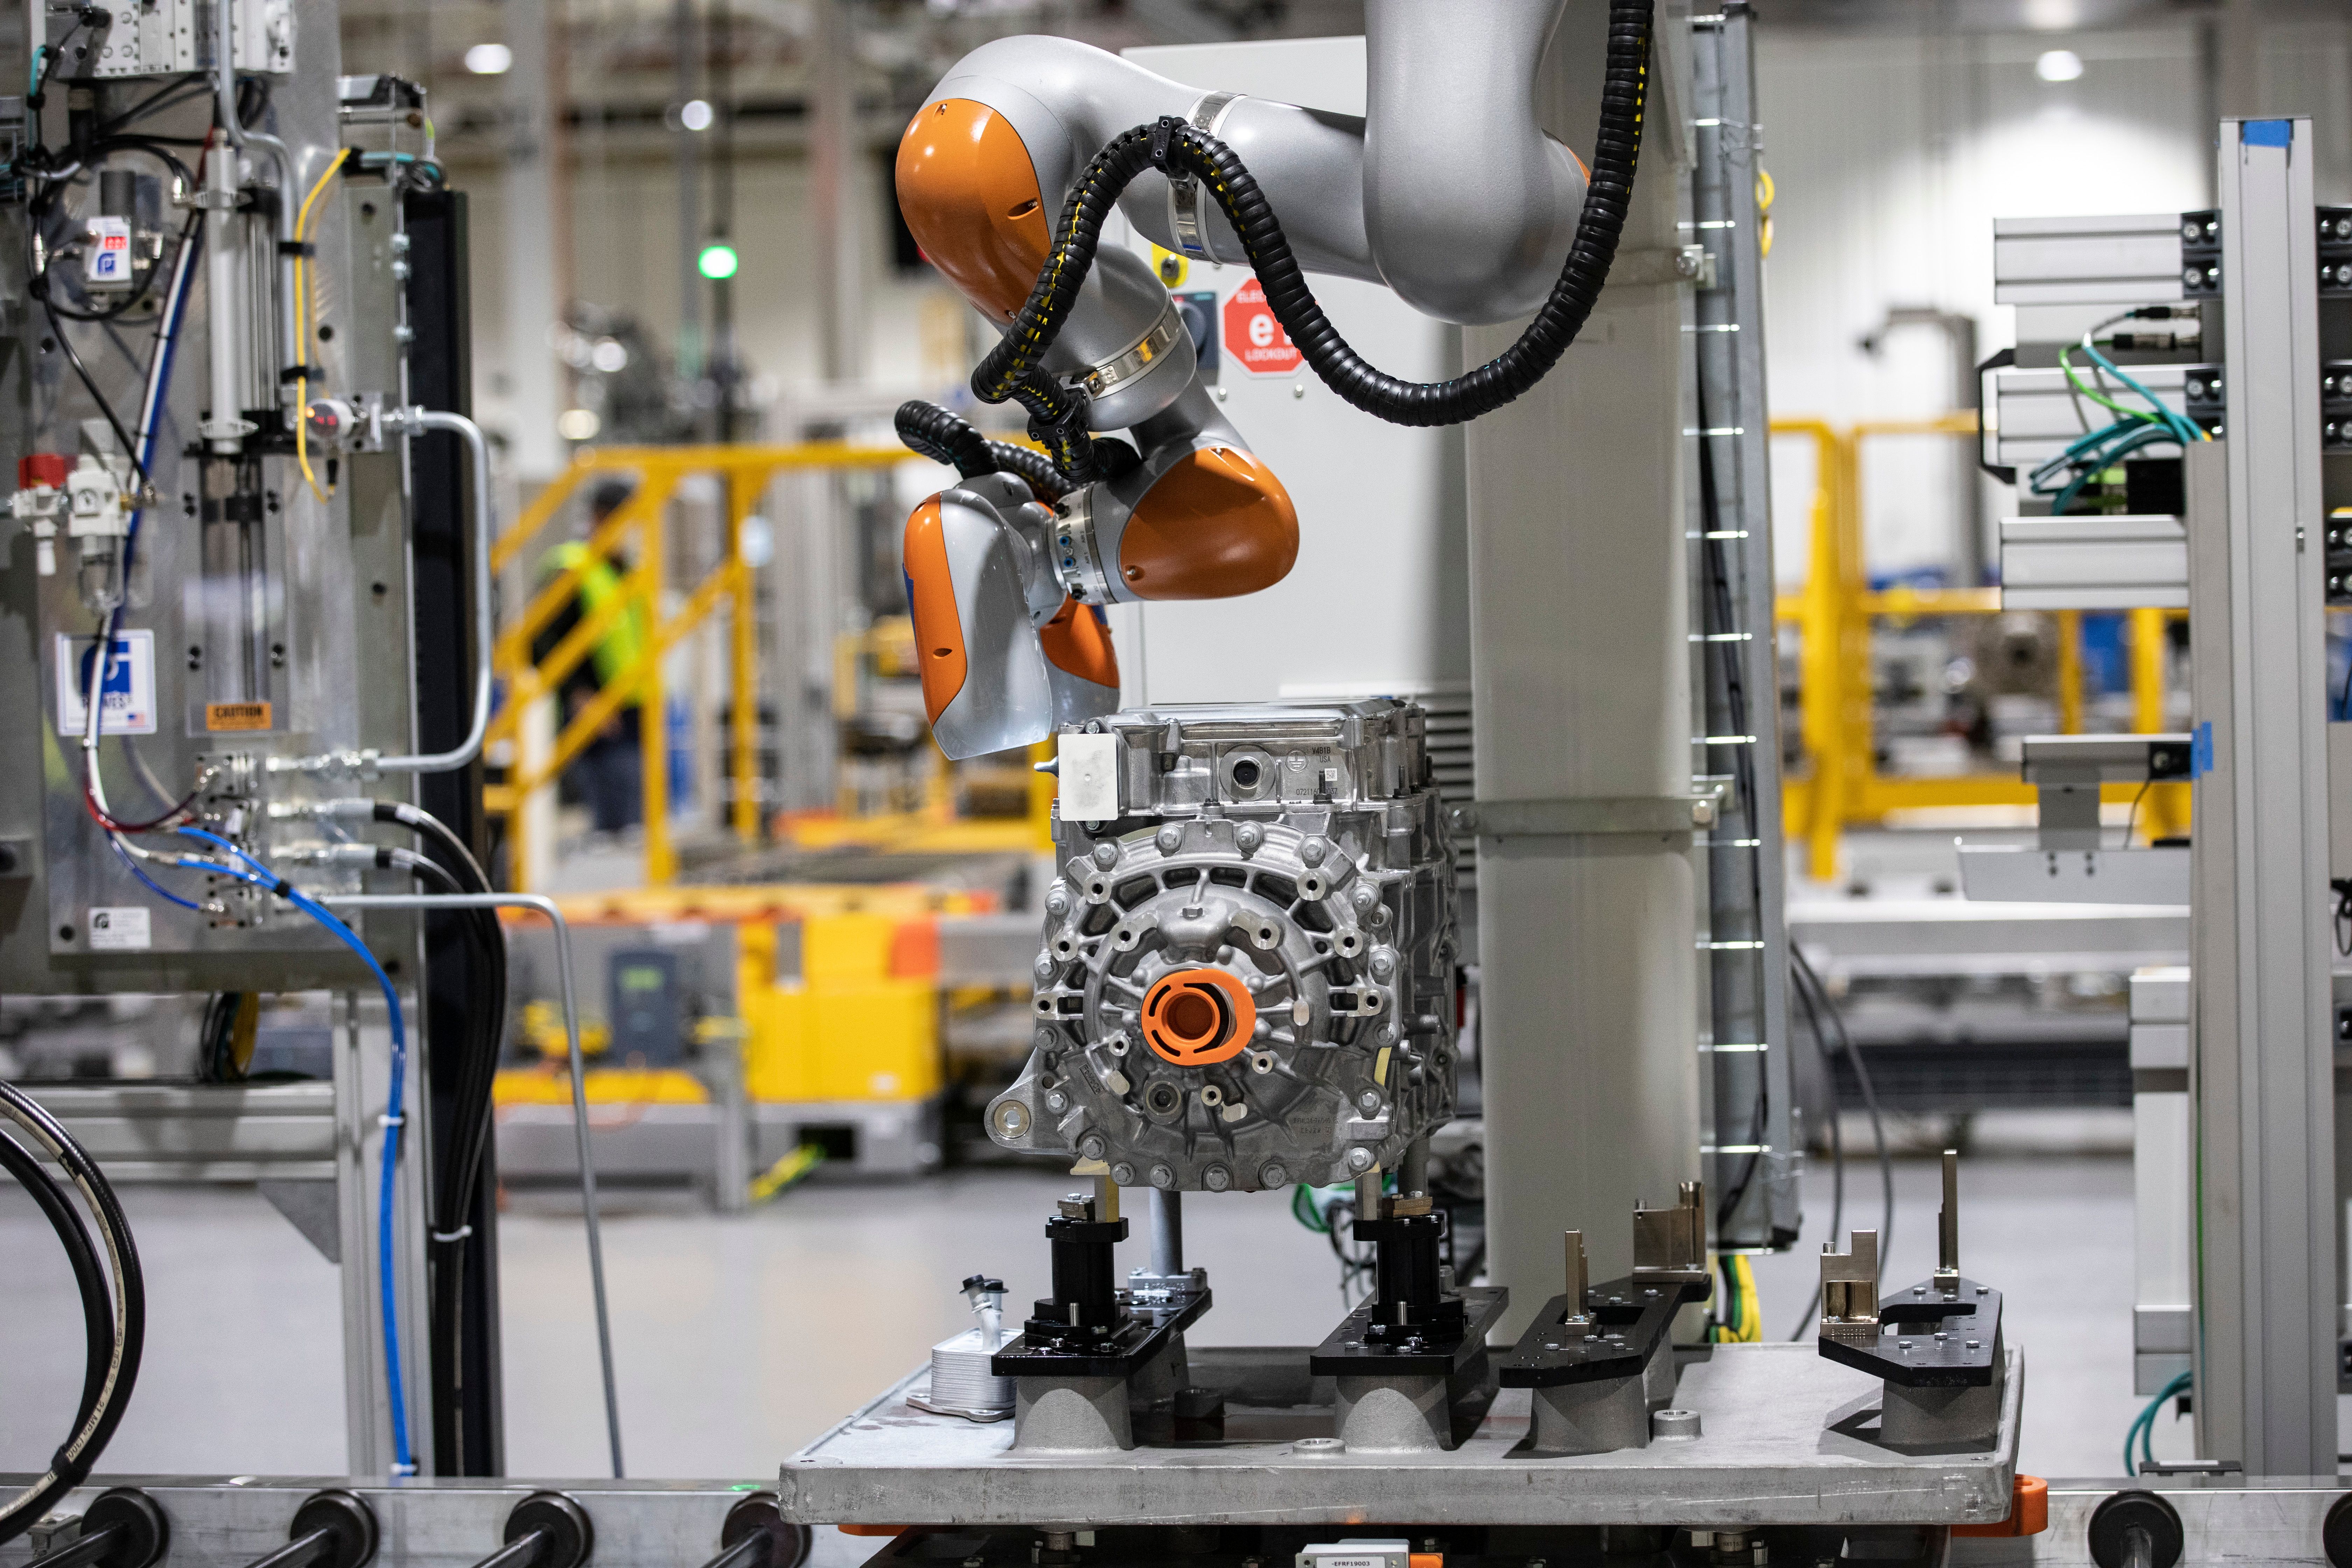 Ford's new electric powertrain center at work